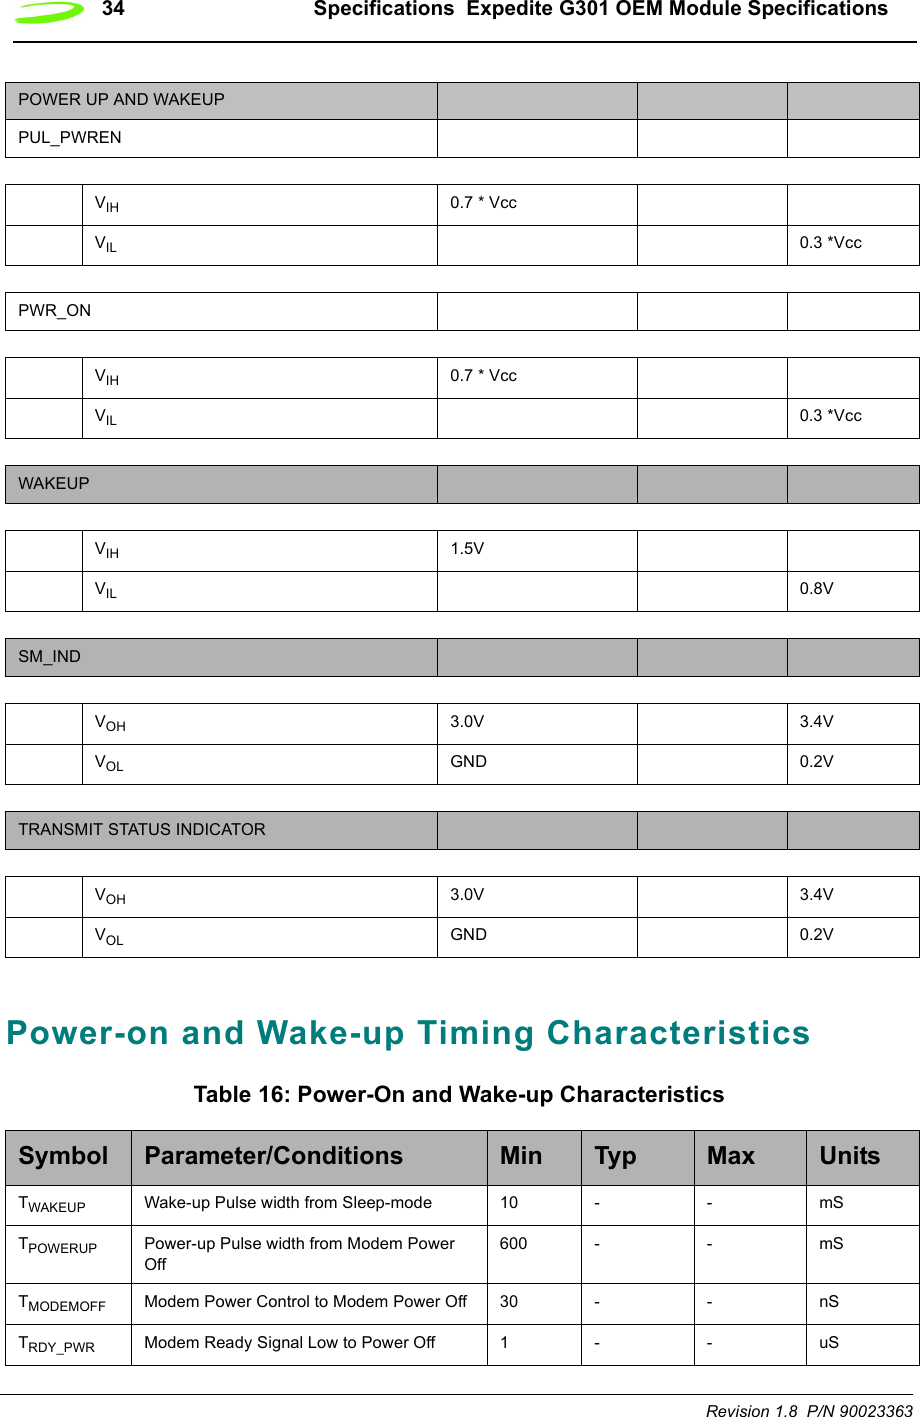 34 Specifications  Expedite G301 OEM Module SpecificationsRevision 1.8  P/N 90023363Power-on and Wake-up Timing CharacteristicsTable 16: Power-On and Wake-up CharacteristicsPOWER UP AND WAKEUPPUL_PWRENVIH 0.7 * VccVIL 0.3 *VccPWR_ONVIH 0.7 * VccVIL 0.3 *VccWAKEUPVIH 1.5VVIL 0.8VSM_INDVOH 3.0V 3.4VVOL GND 0.2VTRANSMIT STATUS INDICATORVOH 3.0V 3.4VVOL GND 0.2VSymbol Parameter/Conditions Min Typ Max UnitsTWAKEUP Wake-up Pulse width from Sleep-mode 10 --mSTPOWERUP Power-up Pulse width from Modem Power Off 600 --mSTMODEMOFF Modem Power Control to Modem Power Off 30 --nSTRDY_PWR Modem Ready Signal Low to Power Off  1--uS